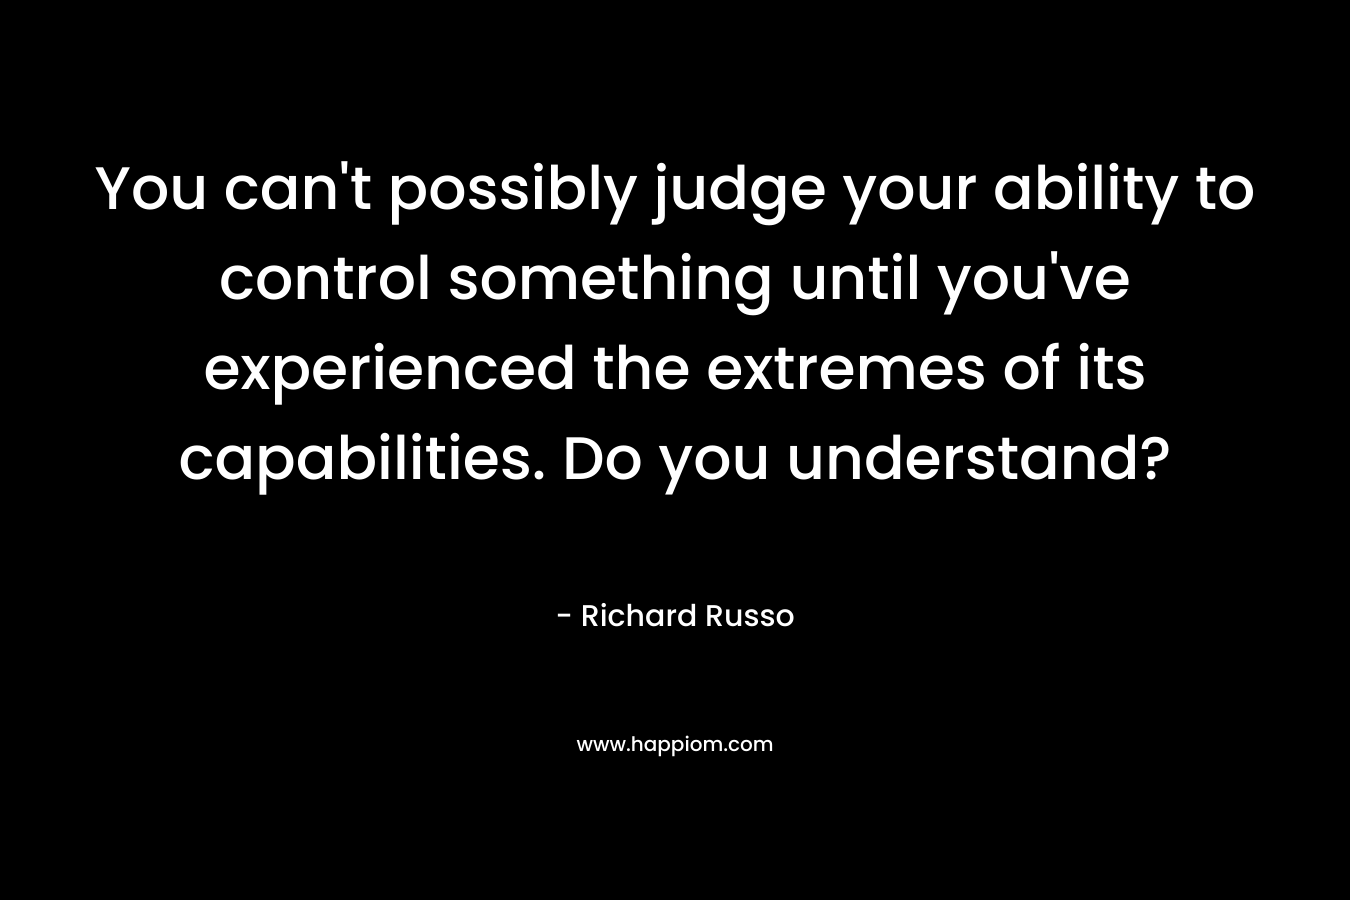 You can’t possibly judge your ability to control something until you’ve experienced the extremes of its capabilities. Do you understand? – Richard Russo